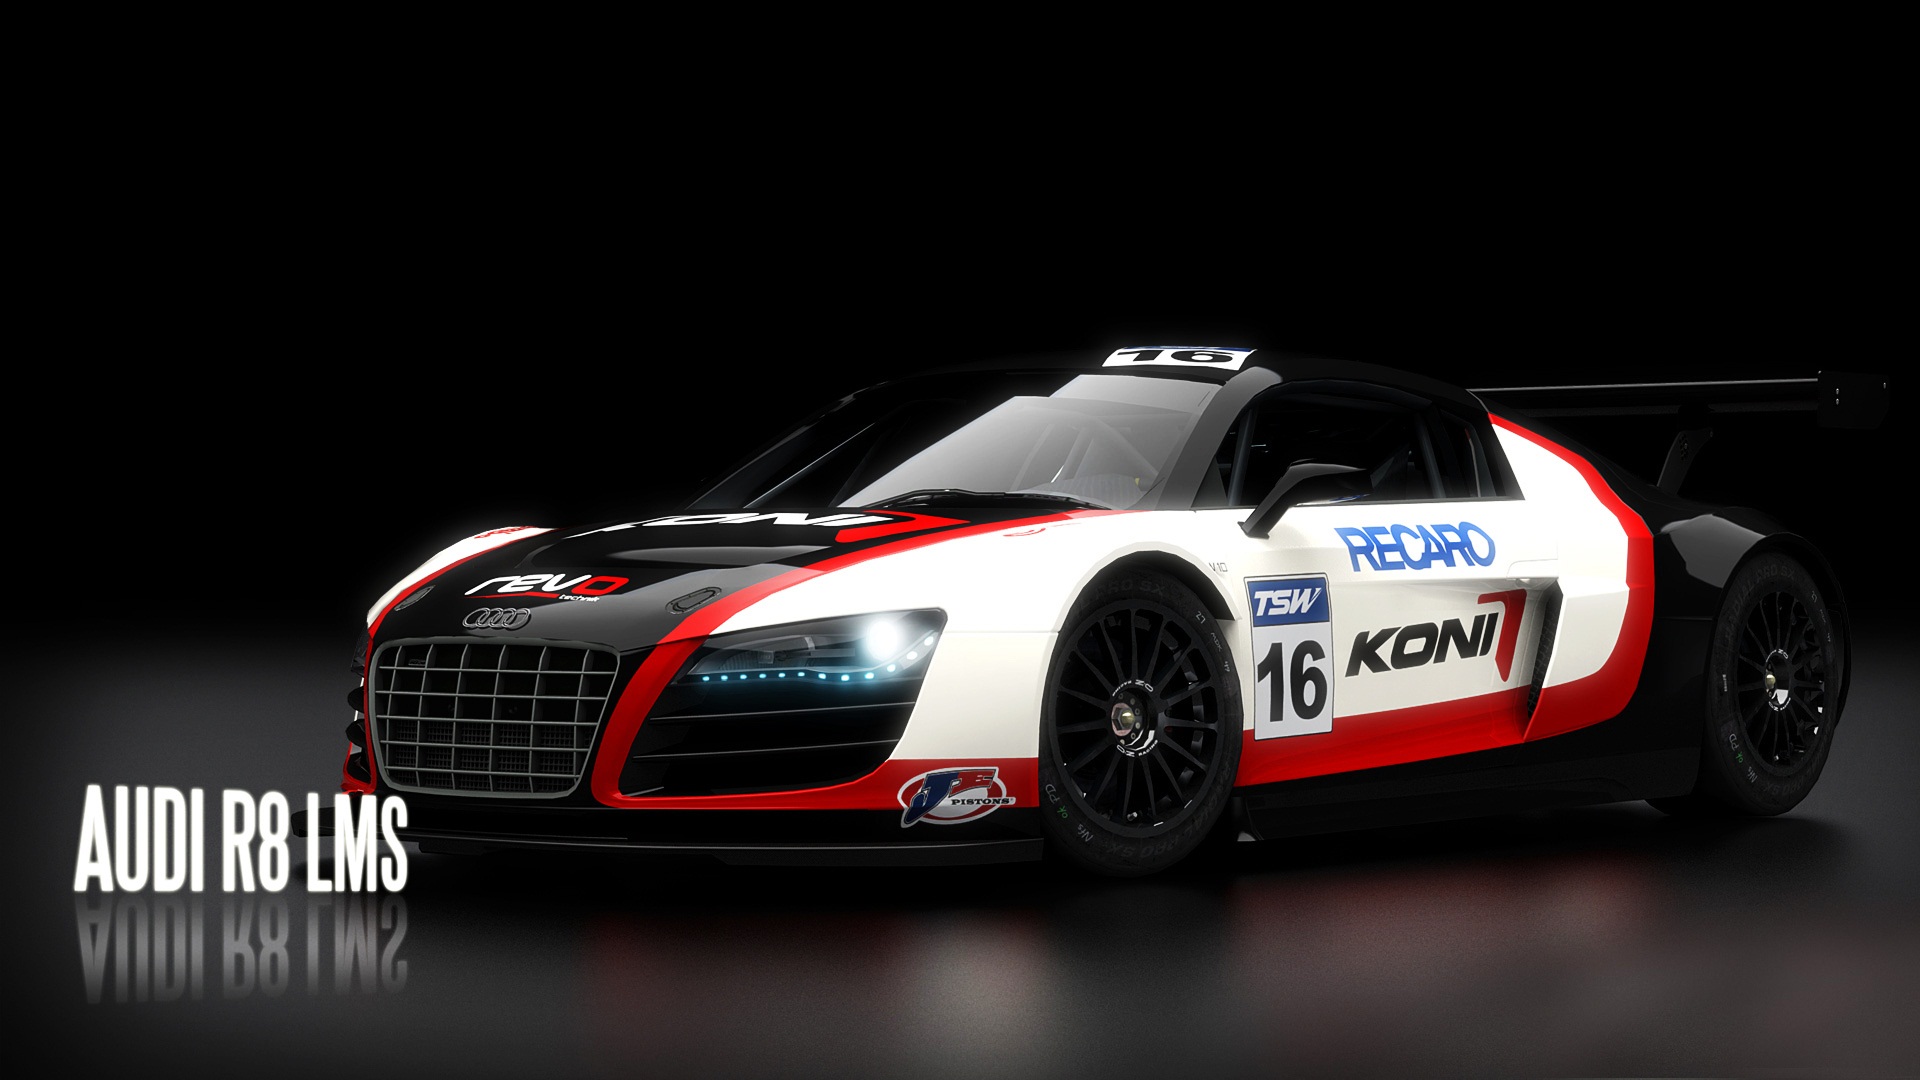 AUDI R8 LMS Wallpapers HD Wallpapers